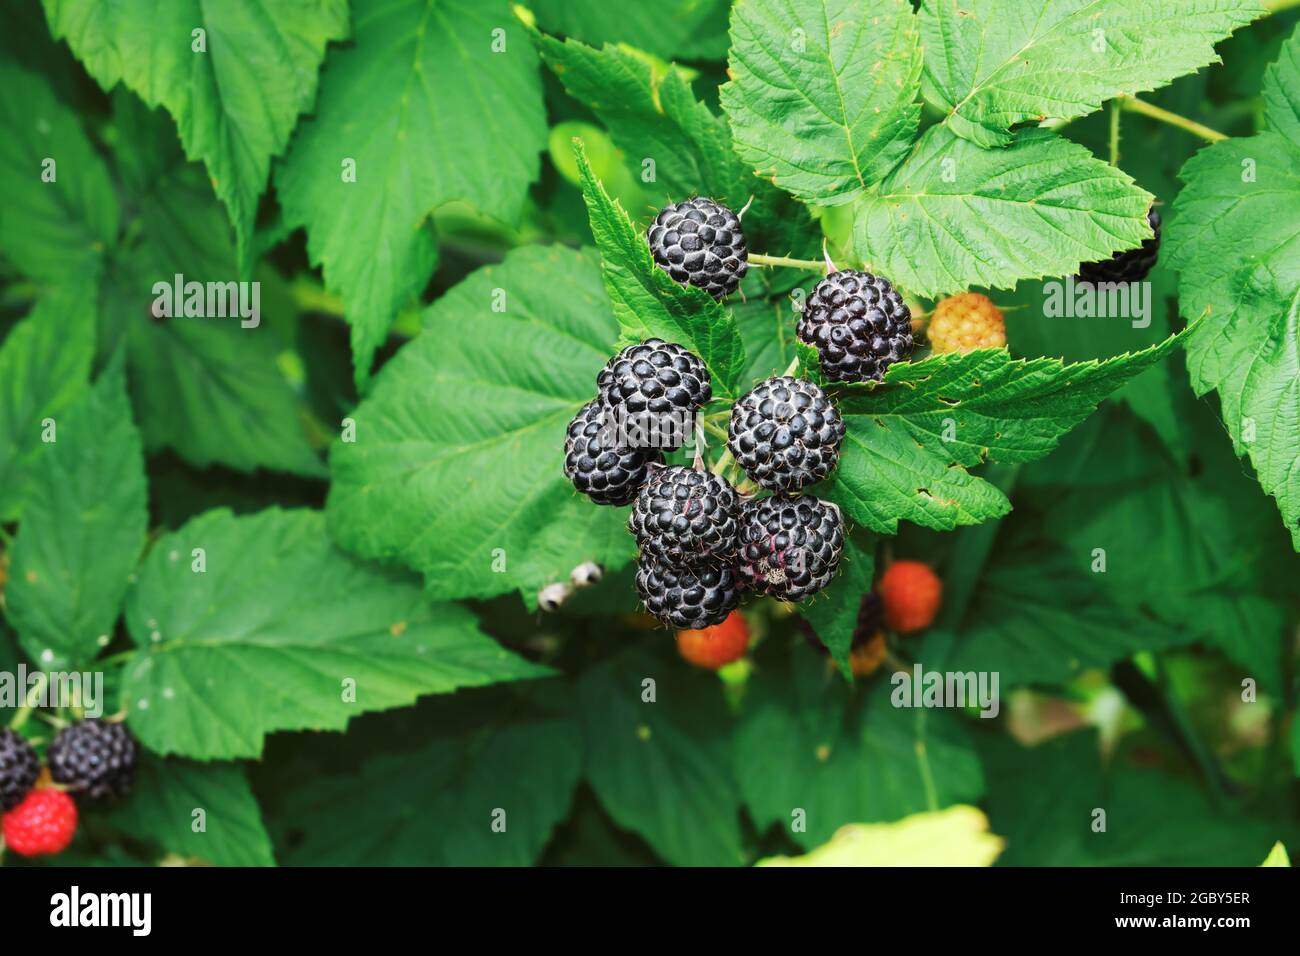 A bunch of ripe, juicy blackberries on a bush among green leaves. Selective focus. Stock Photo